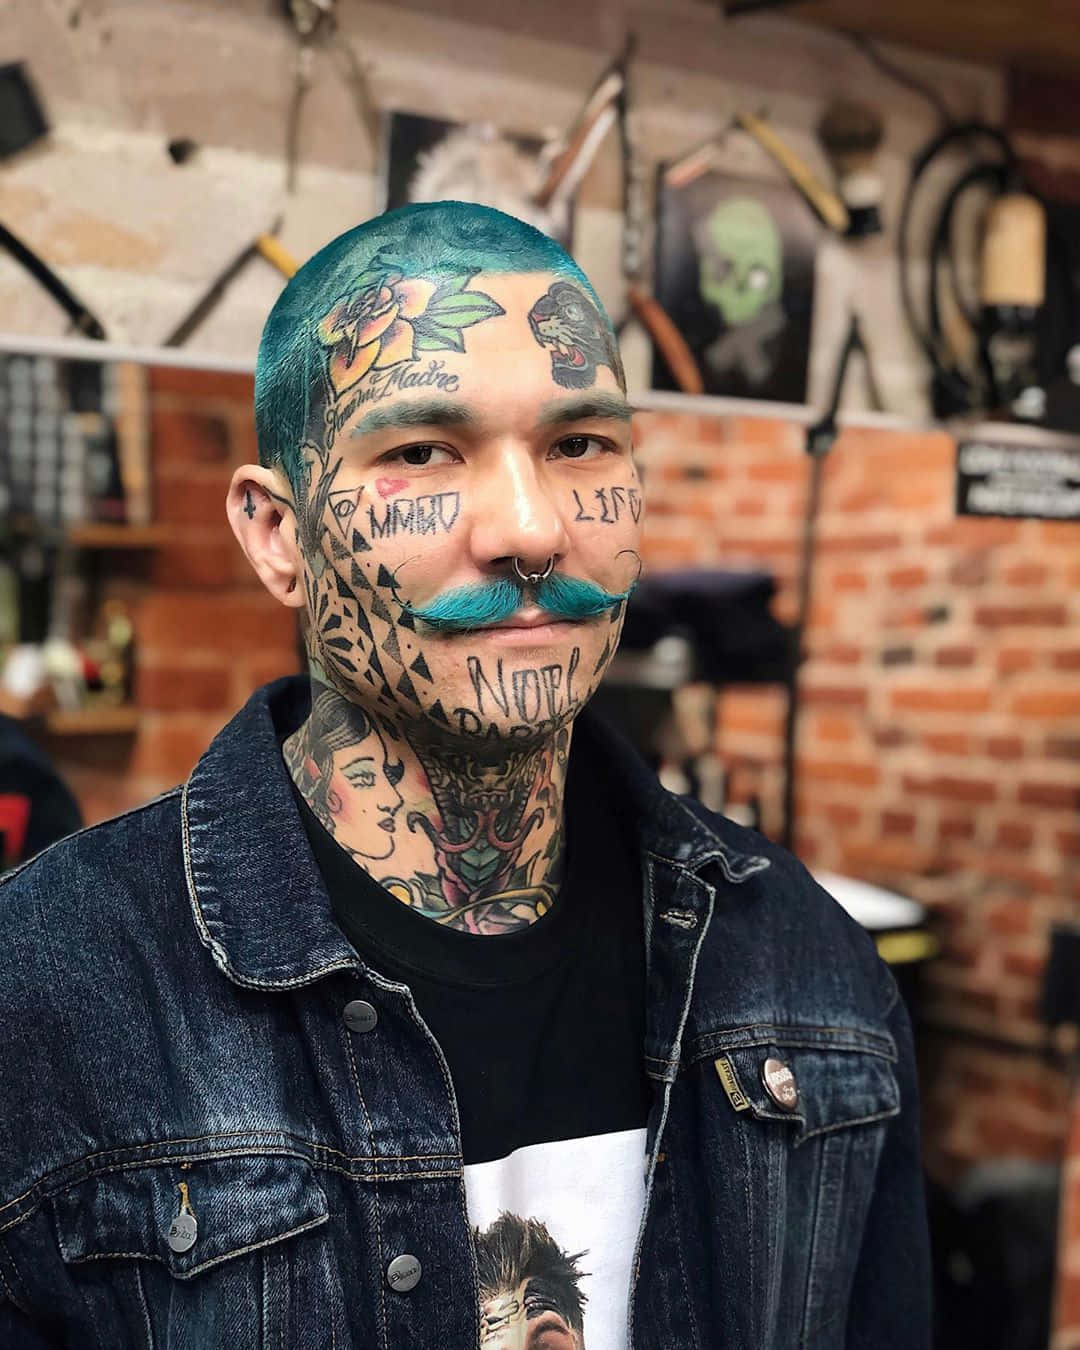 A Man With A Green Hair And Mustache In A Tattoo Shop